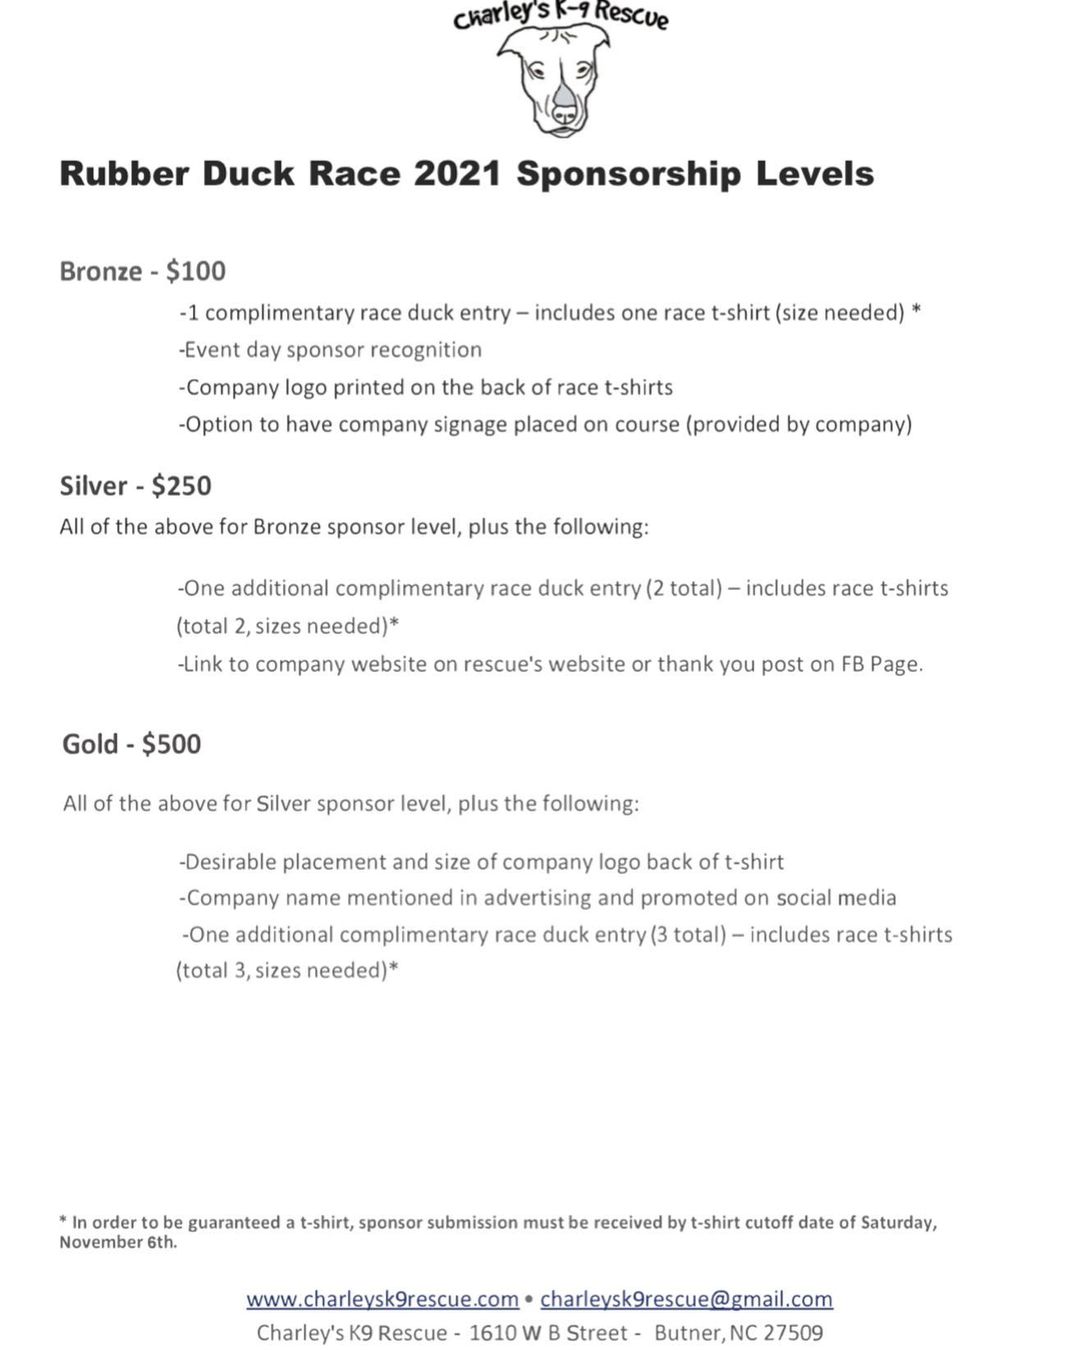 If any of our supporters have their own business or know of any local business that want to sponsor our first ever rubber duck race, we’d love to hear from you. We’ll be selling T-shirts for the race and the back of the shirt is the perfect canvas to advertise our supporters.